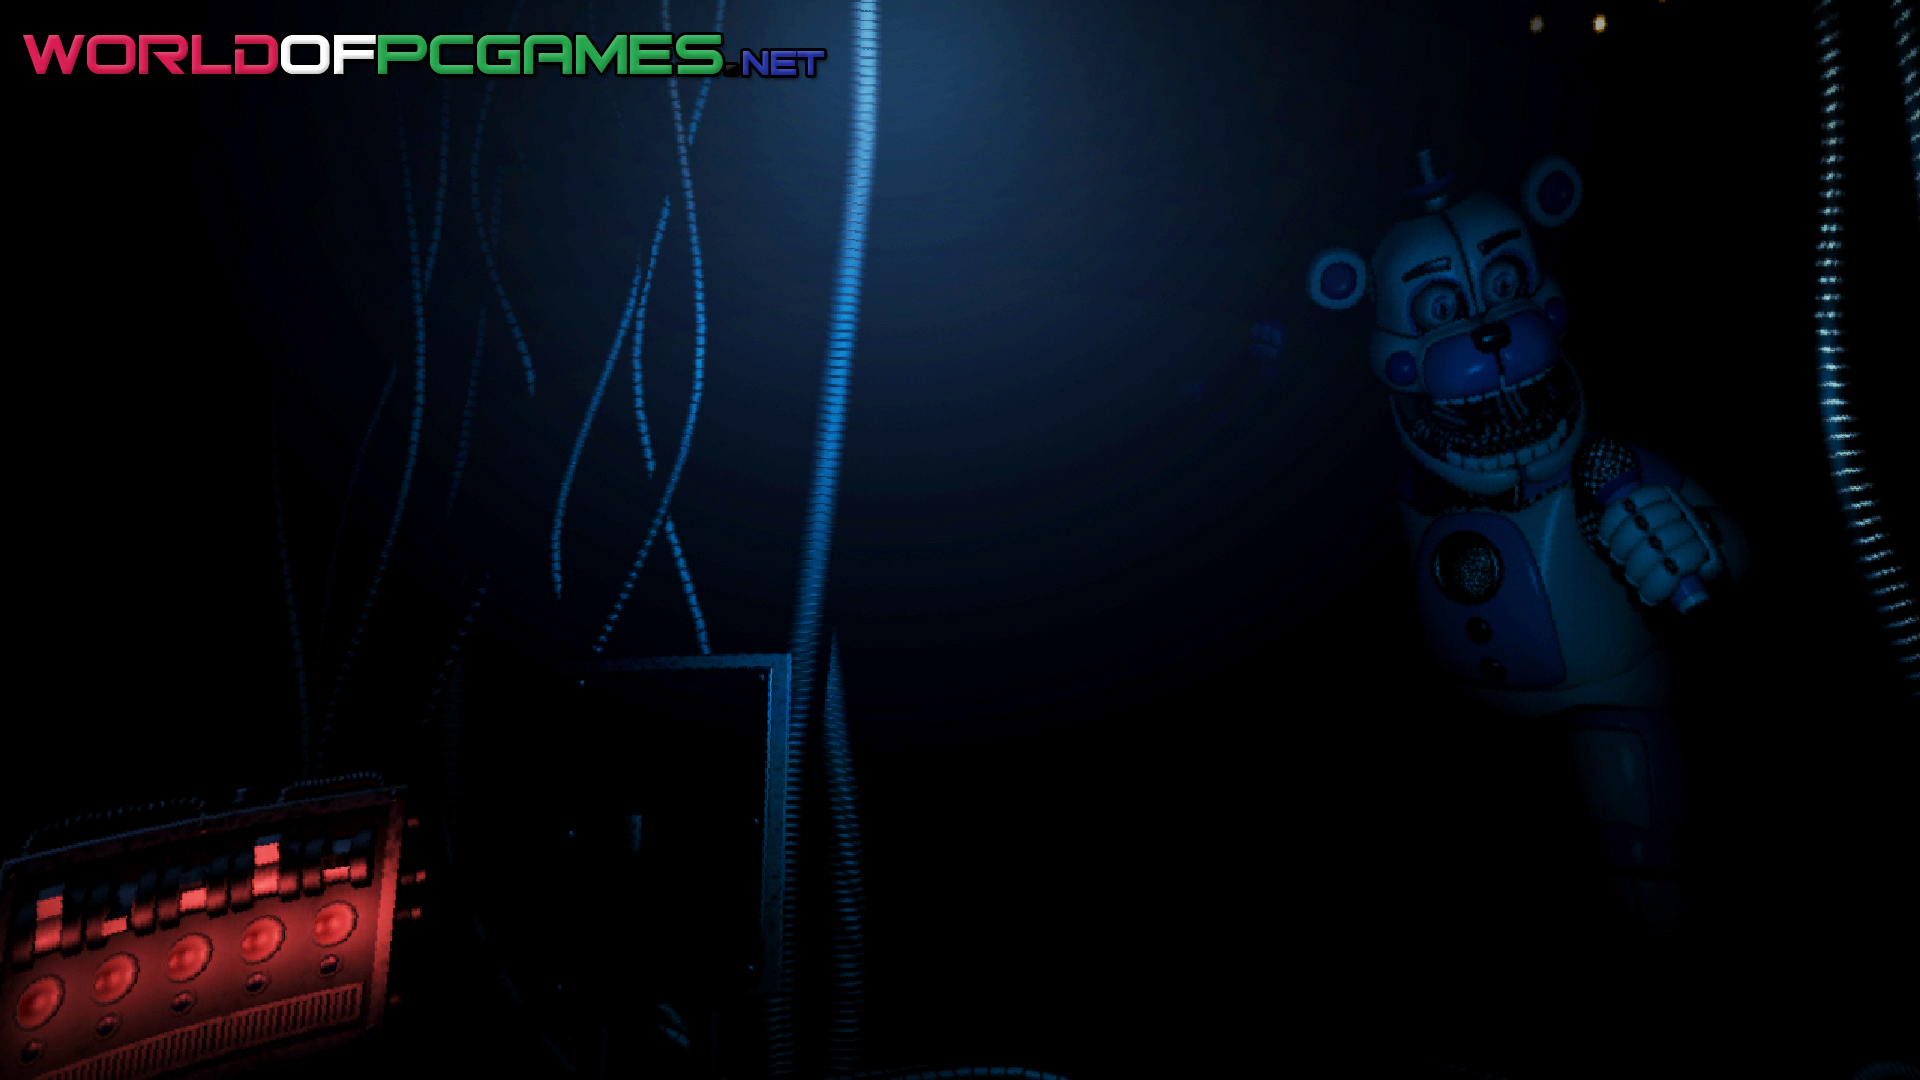 Five Nights At Freddys Sister Location Free Download PC Game By Worldofpcgames